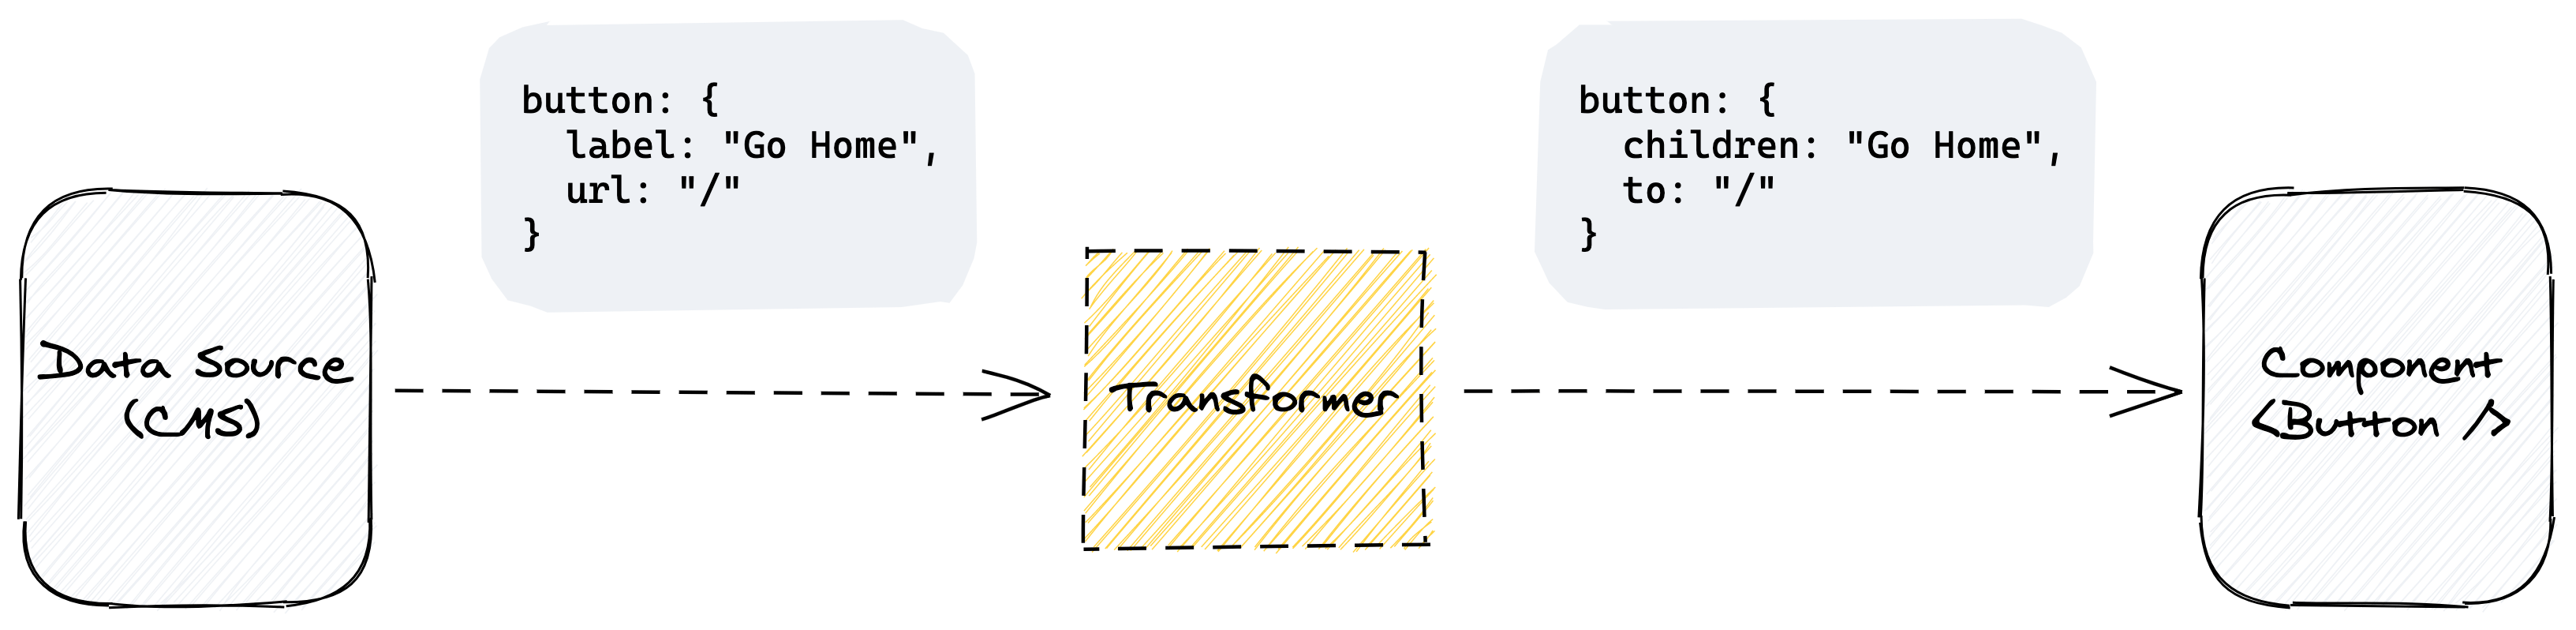 Illustration showing a rounded square that says Data Source pointing to a yellow box that says transformer, pointing to another rounded square that says component. There is a small code snippet on both sides of the yellow square showing how it transforms the Label and URL fields to Children and To, respectively.